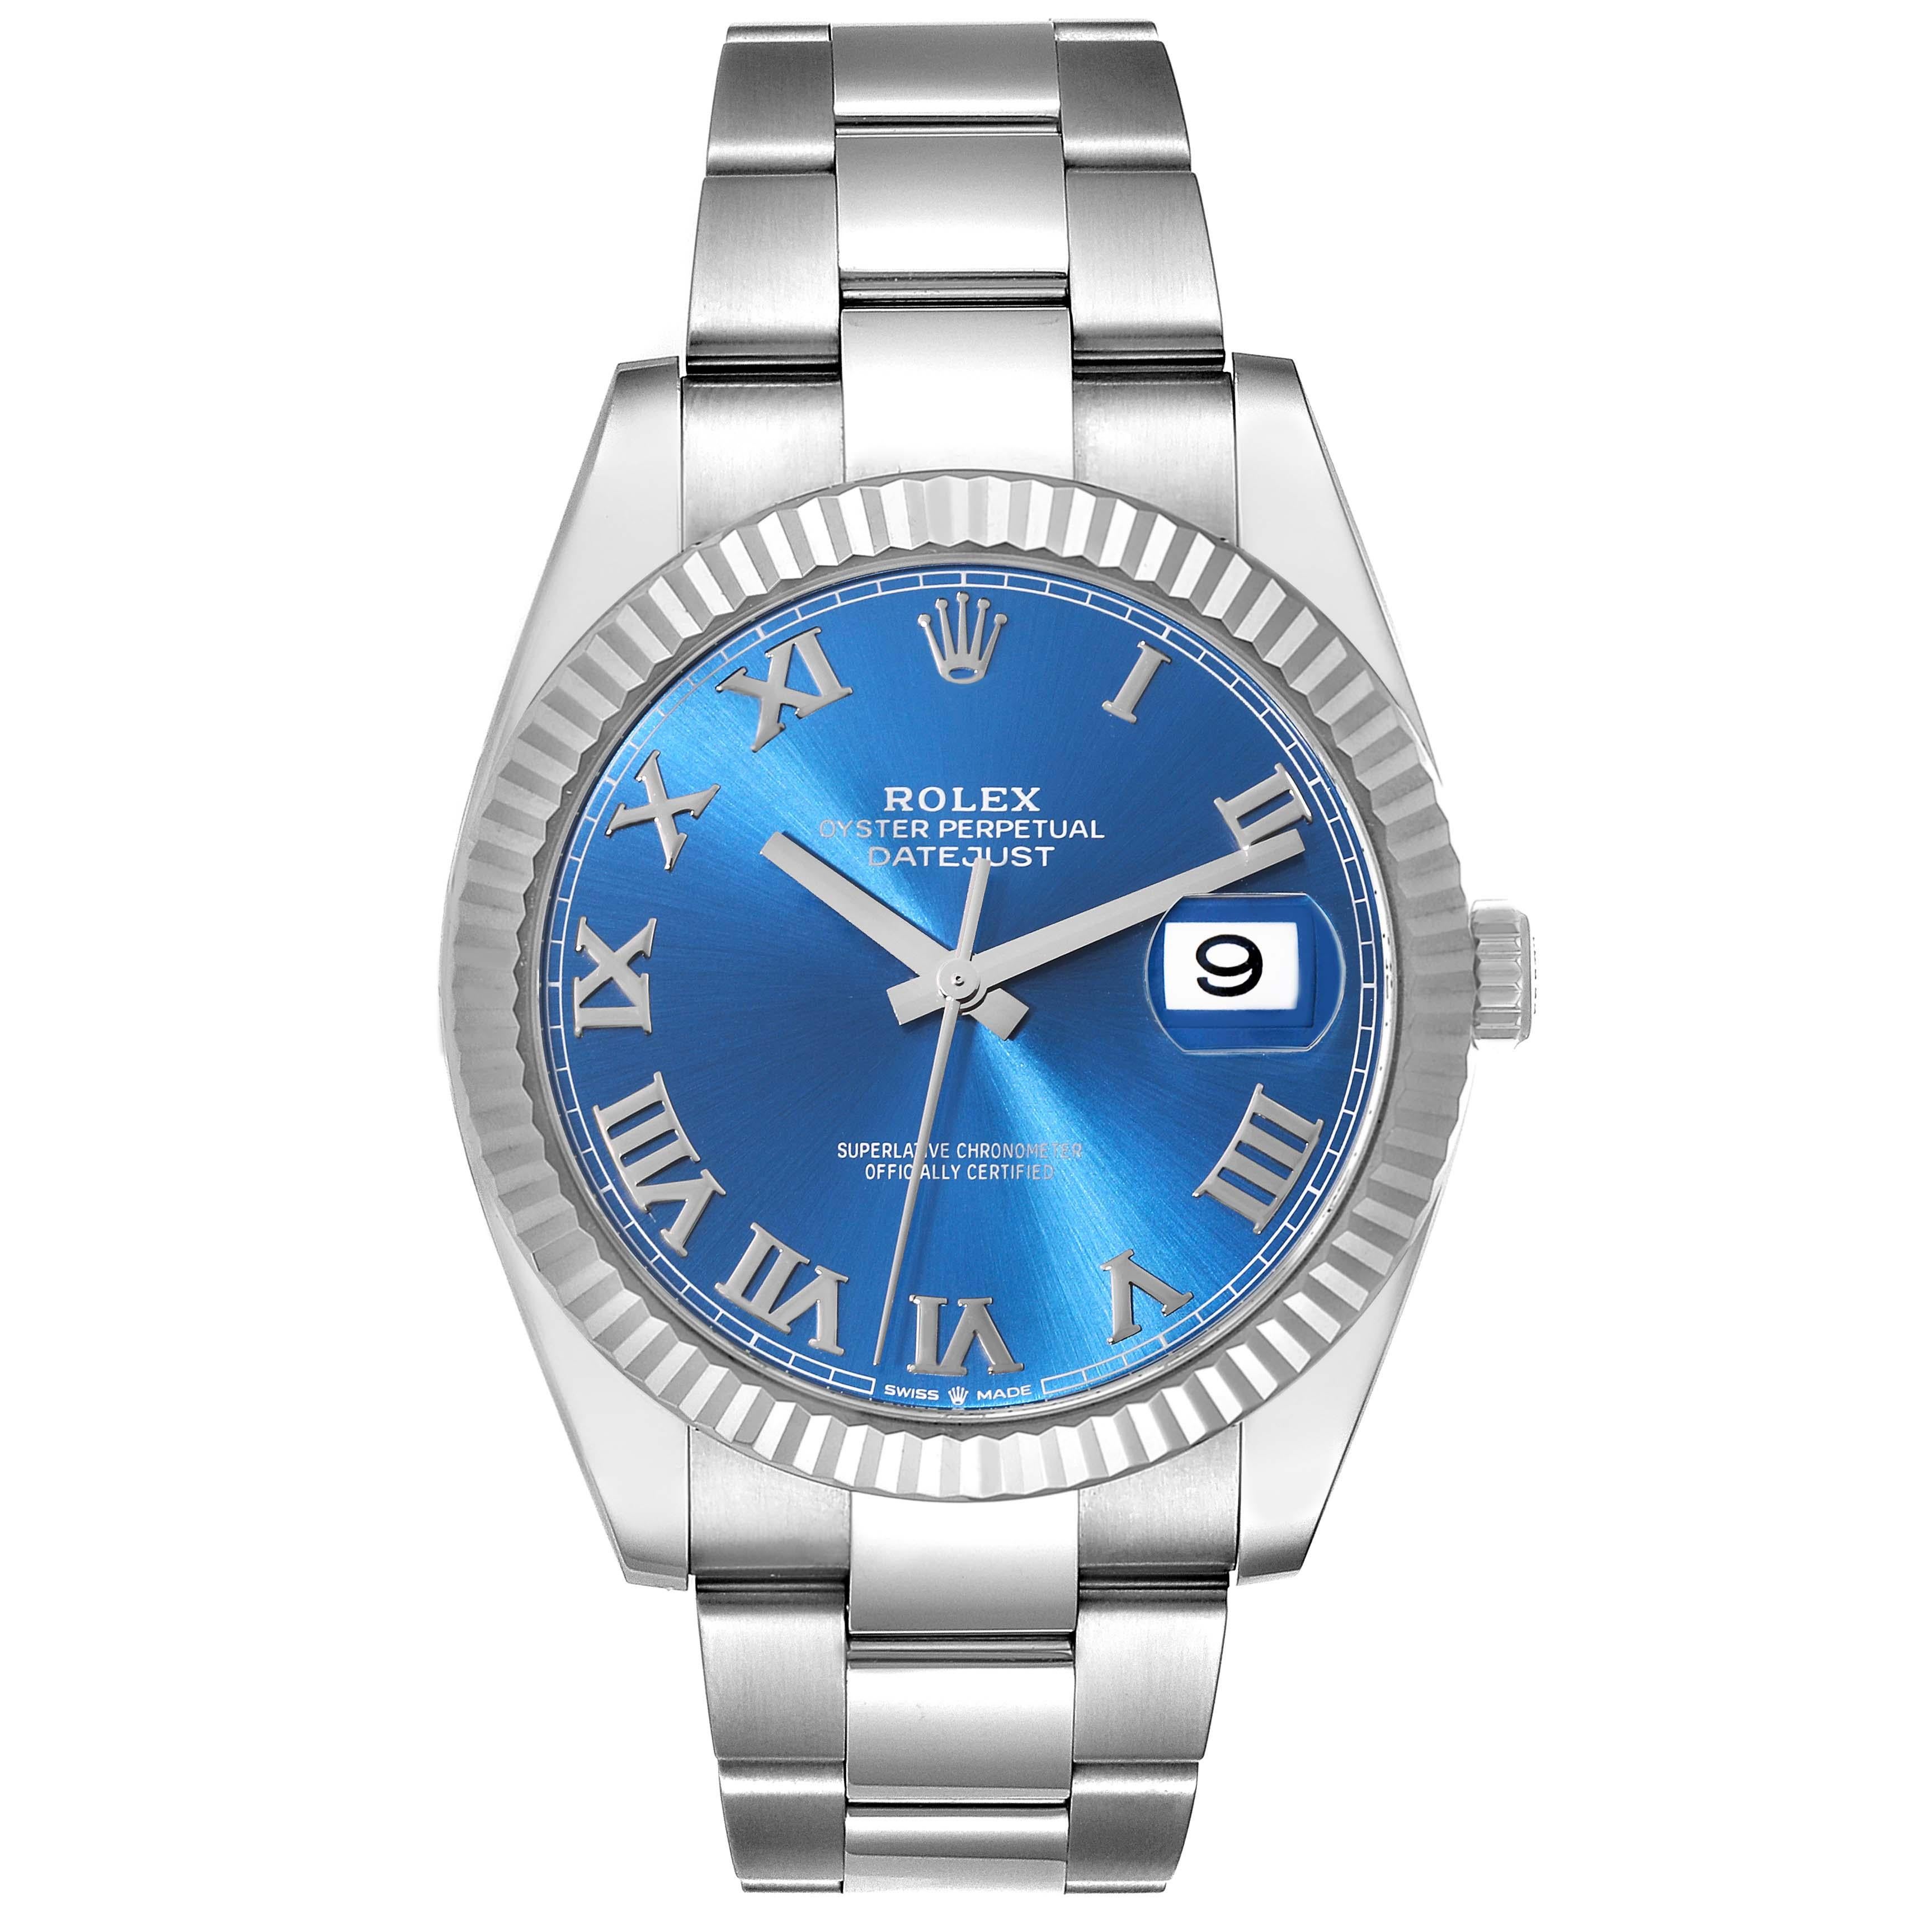 Rolex Datejust 41 Steel White Gold Blue Roman Dial Mens Watch 126334. Officially certified chronometer automatic self-winding movement. Stainless steel case 41 mm in diameter. Rolex logo on the crown. 18K white gold fluted bezel. Scratch resistant